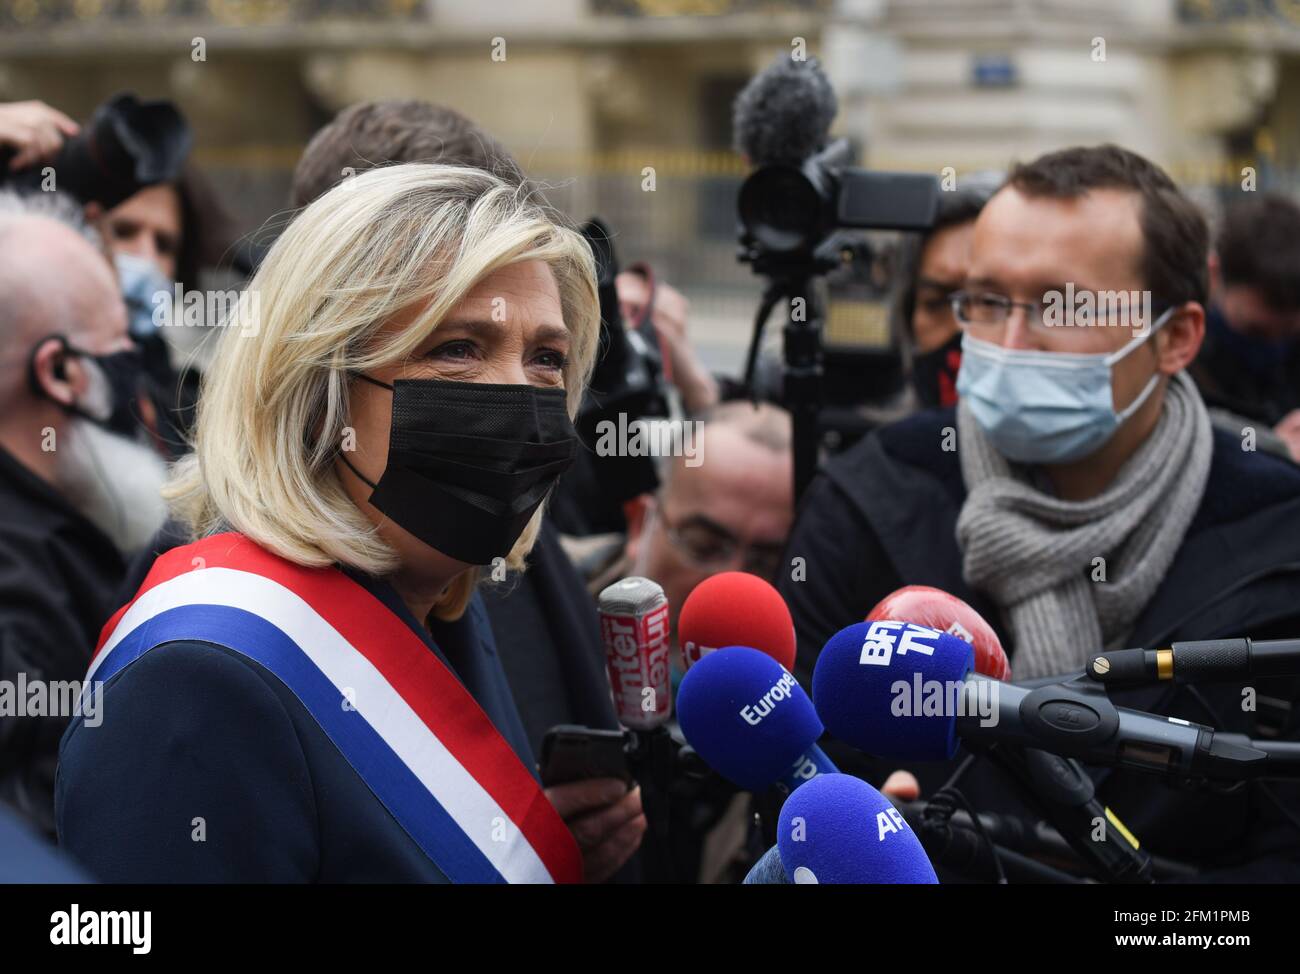 *** STRICTLY NO SALES TO FRENCH MEDIA OR PUBLISHERS - RIGHTS RESERVED ***May 01, 2021 - Paris, France: Marine Le Pen, leader of the far-right Rassemblement National party (RN) talks to journalists after laying a wreath of flowers in front of a statue of Joan of Arc. The traditional May Day ceremony took place as Le Pen prepares to launch her campaign for the regional election. Stock Photo